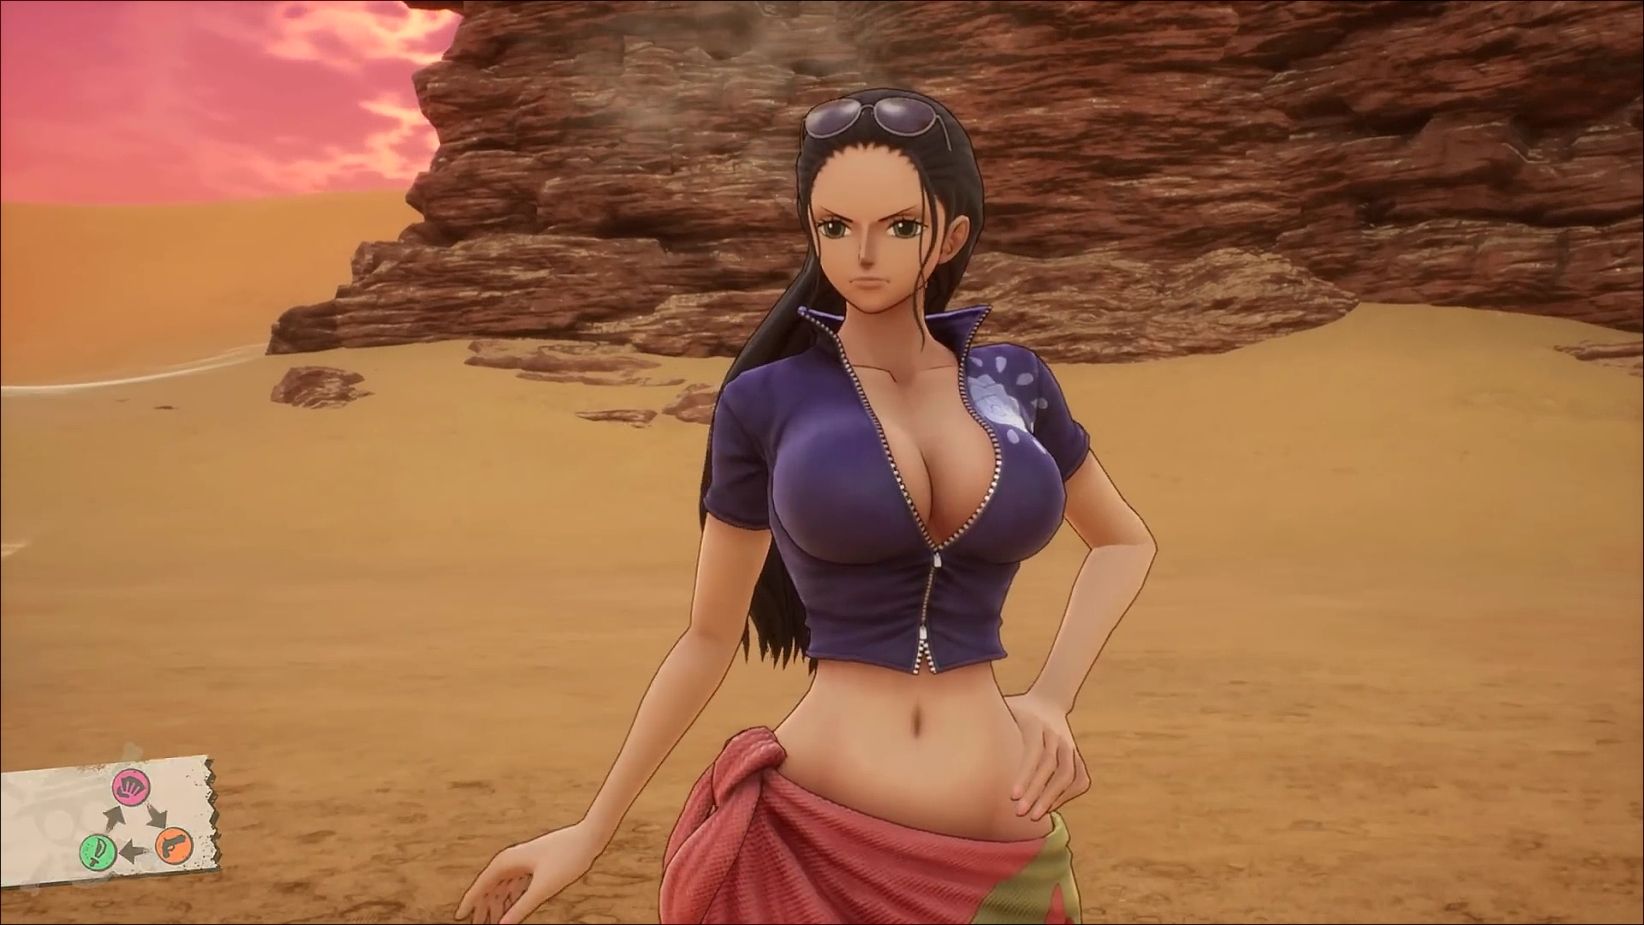 【Image】New "One Piece Odyssey", Nami and Robin 3D model is too erotic 4